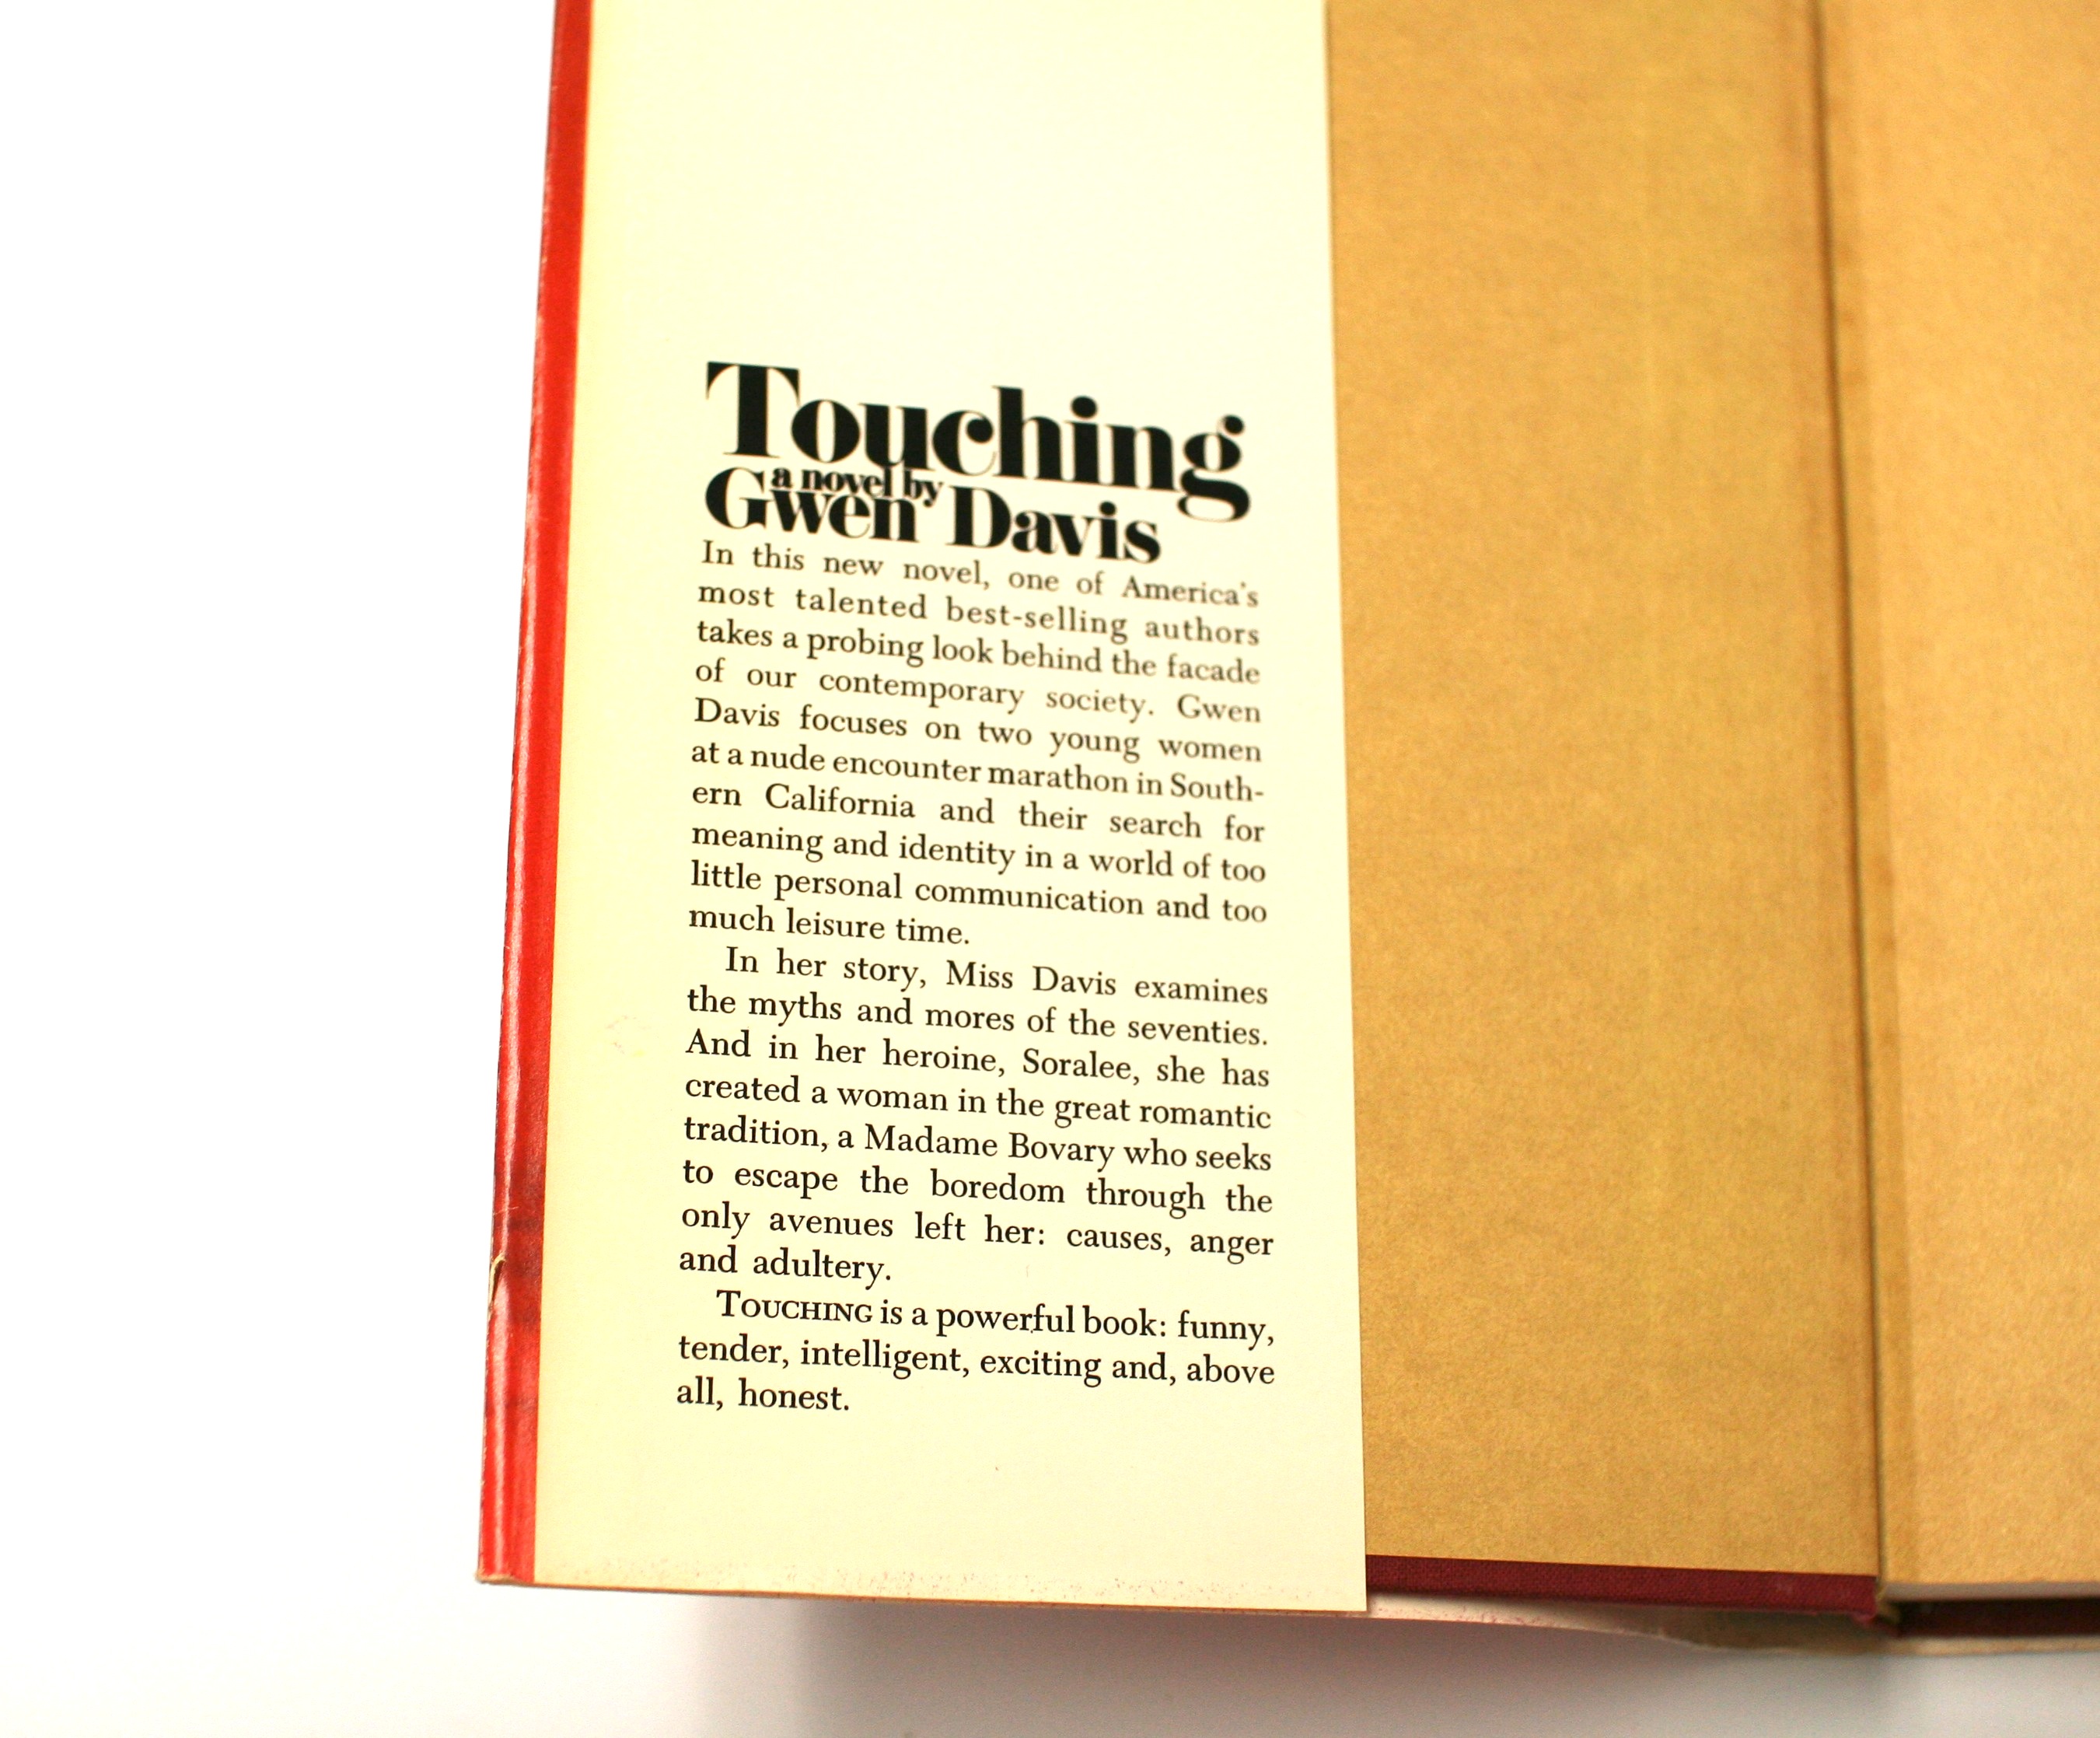  - Bindrim_v._Mitchell_(First-edition_hardcover_of_Touching_by_Gwen_Davis)_no._5601